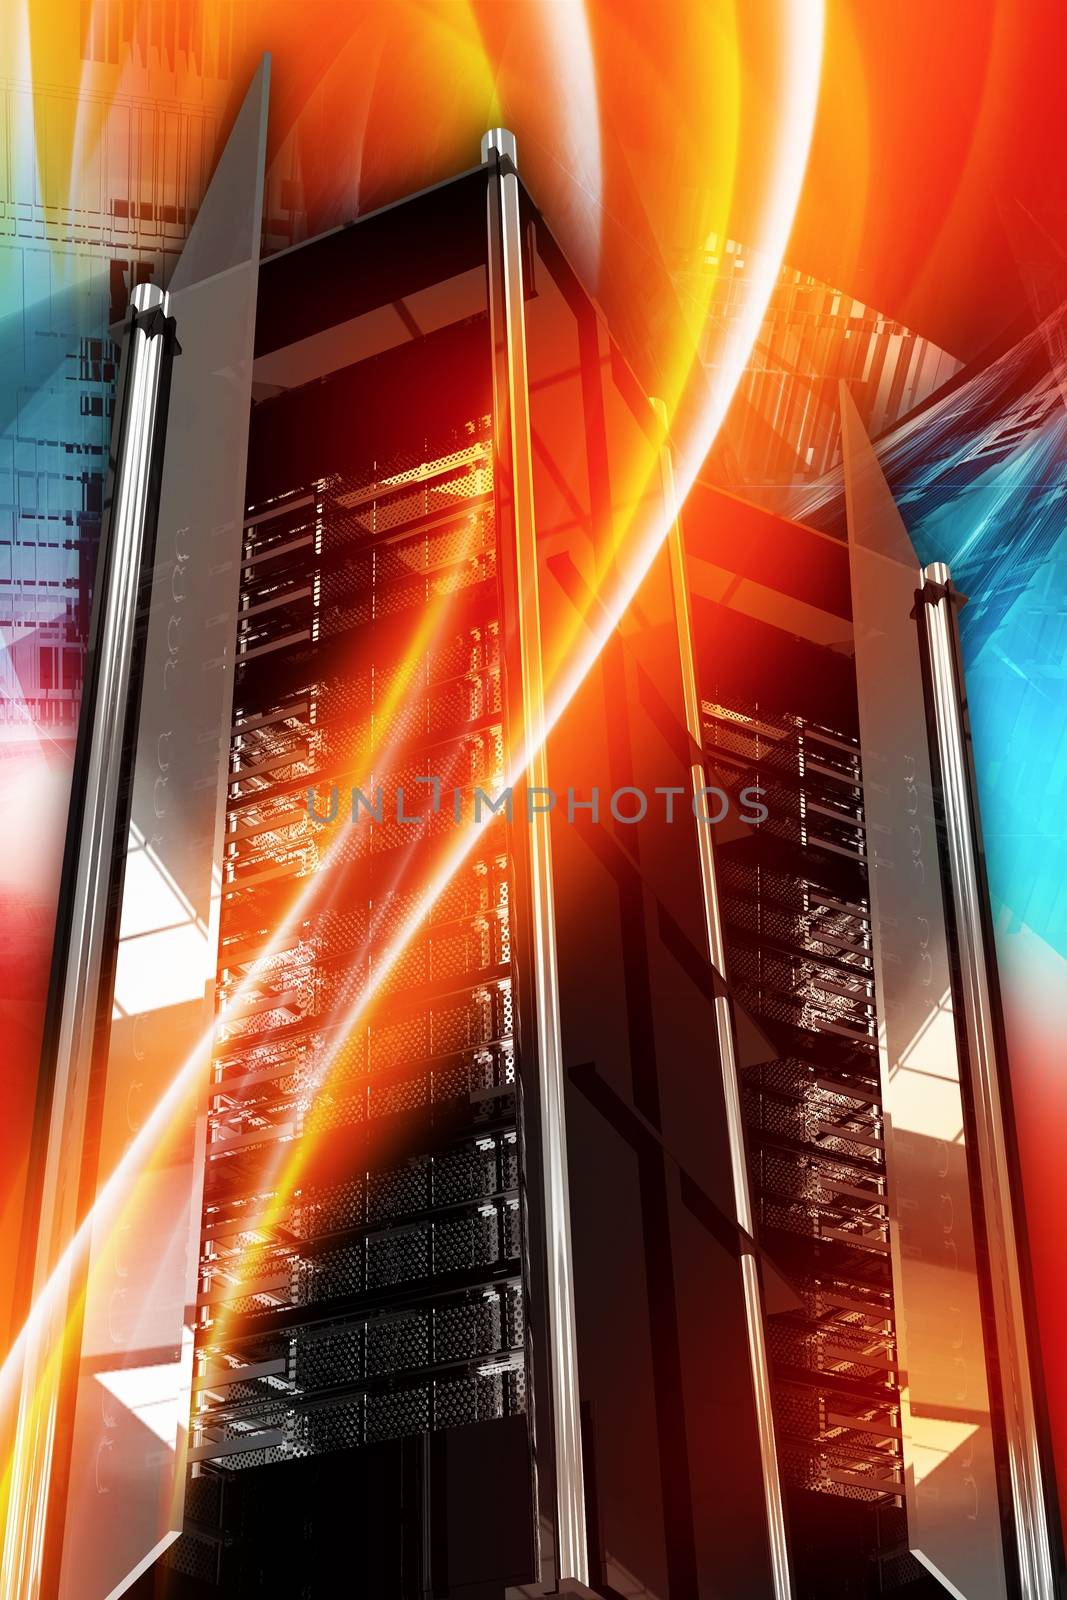 Hottest Server Deals. Hosting and Networking Theme. Cool Colorful Vertical Hosting Theme with Server Racks and Burning Orange-Red Wavy Ornaments. Hot Servers 3D Rendered Illustration.